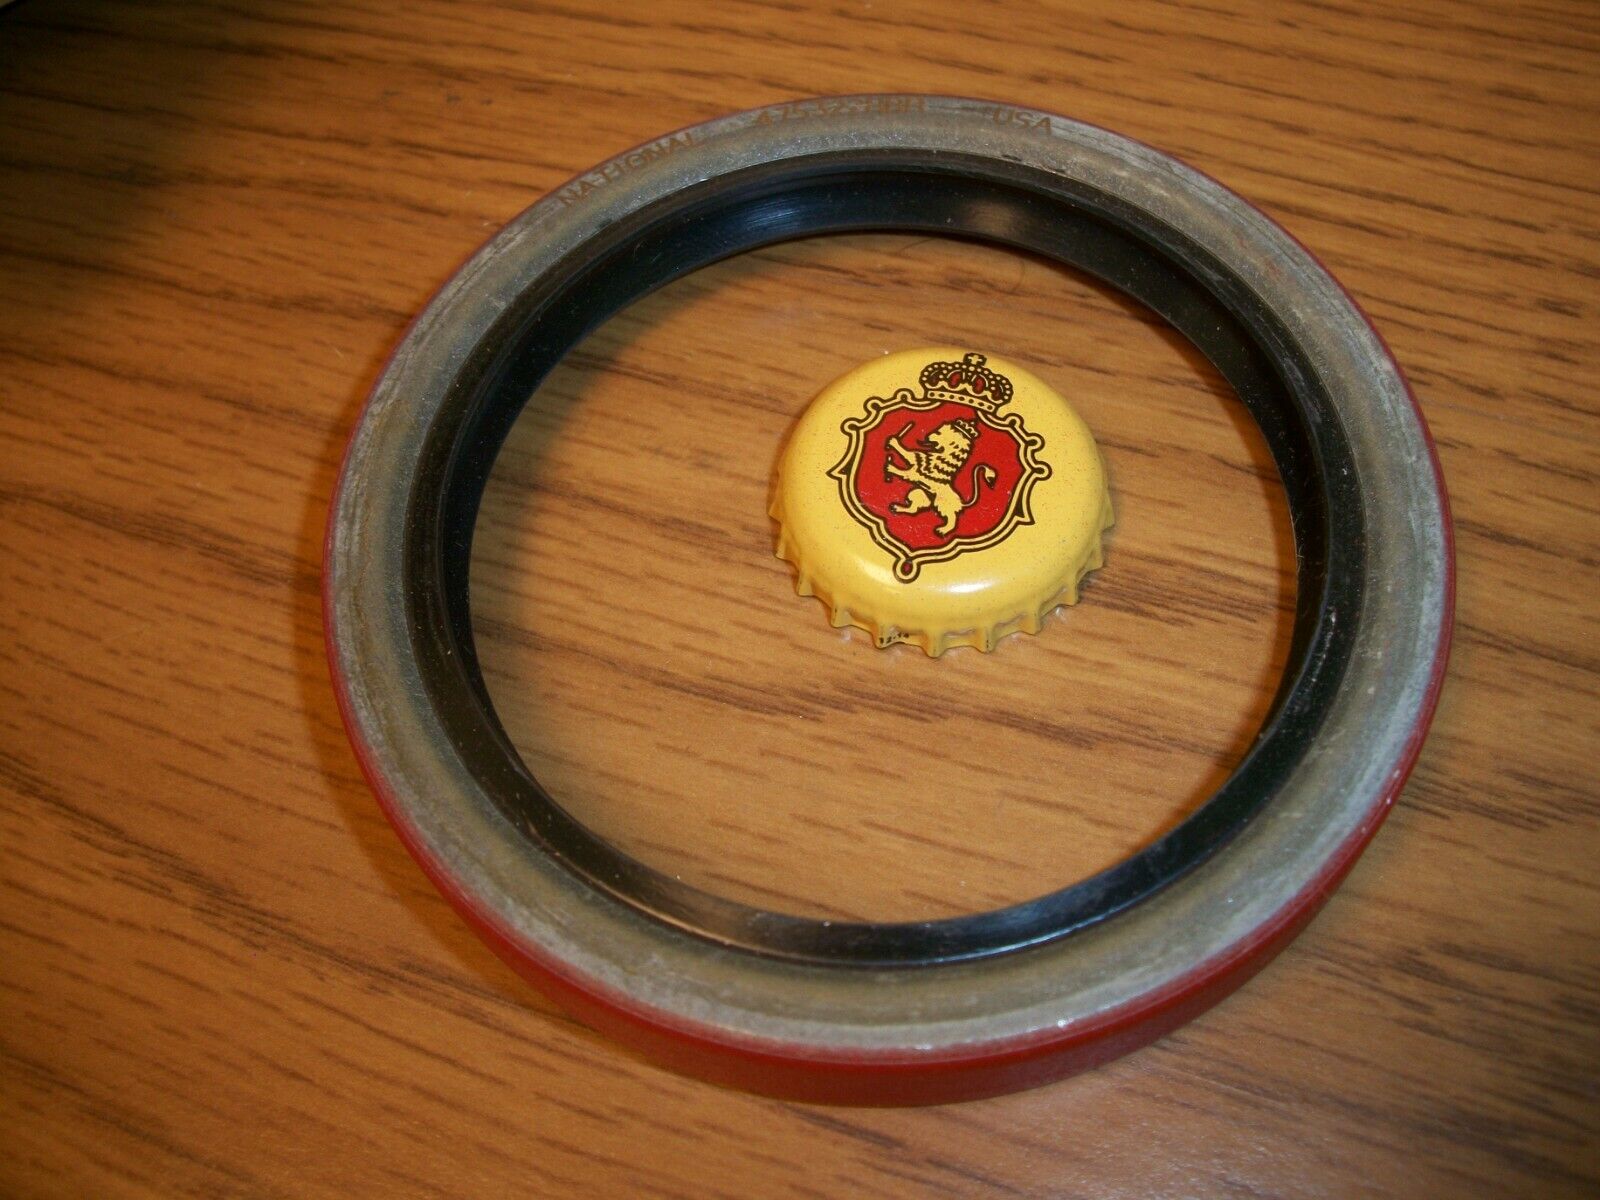 NOS National Seal 475322RBR A-1805-D-212 P3047 72910 M-915 M-916A1 5330006412079